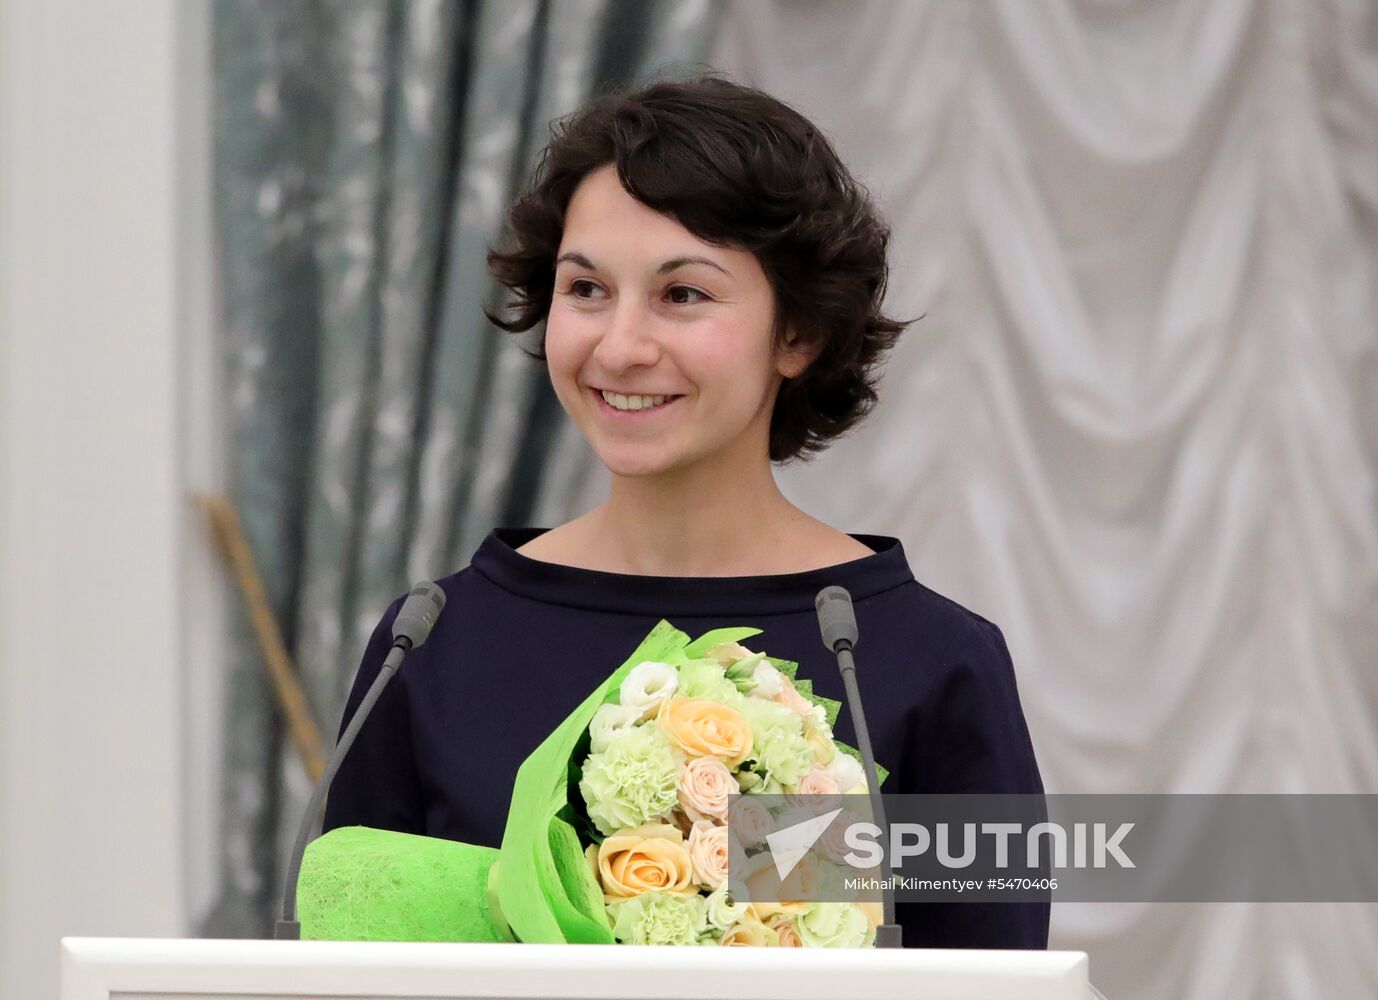 President Vladimir Putin presents presidential prizes to young culture professionals and for writing and art for children